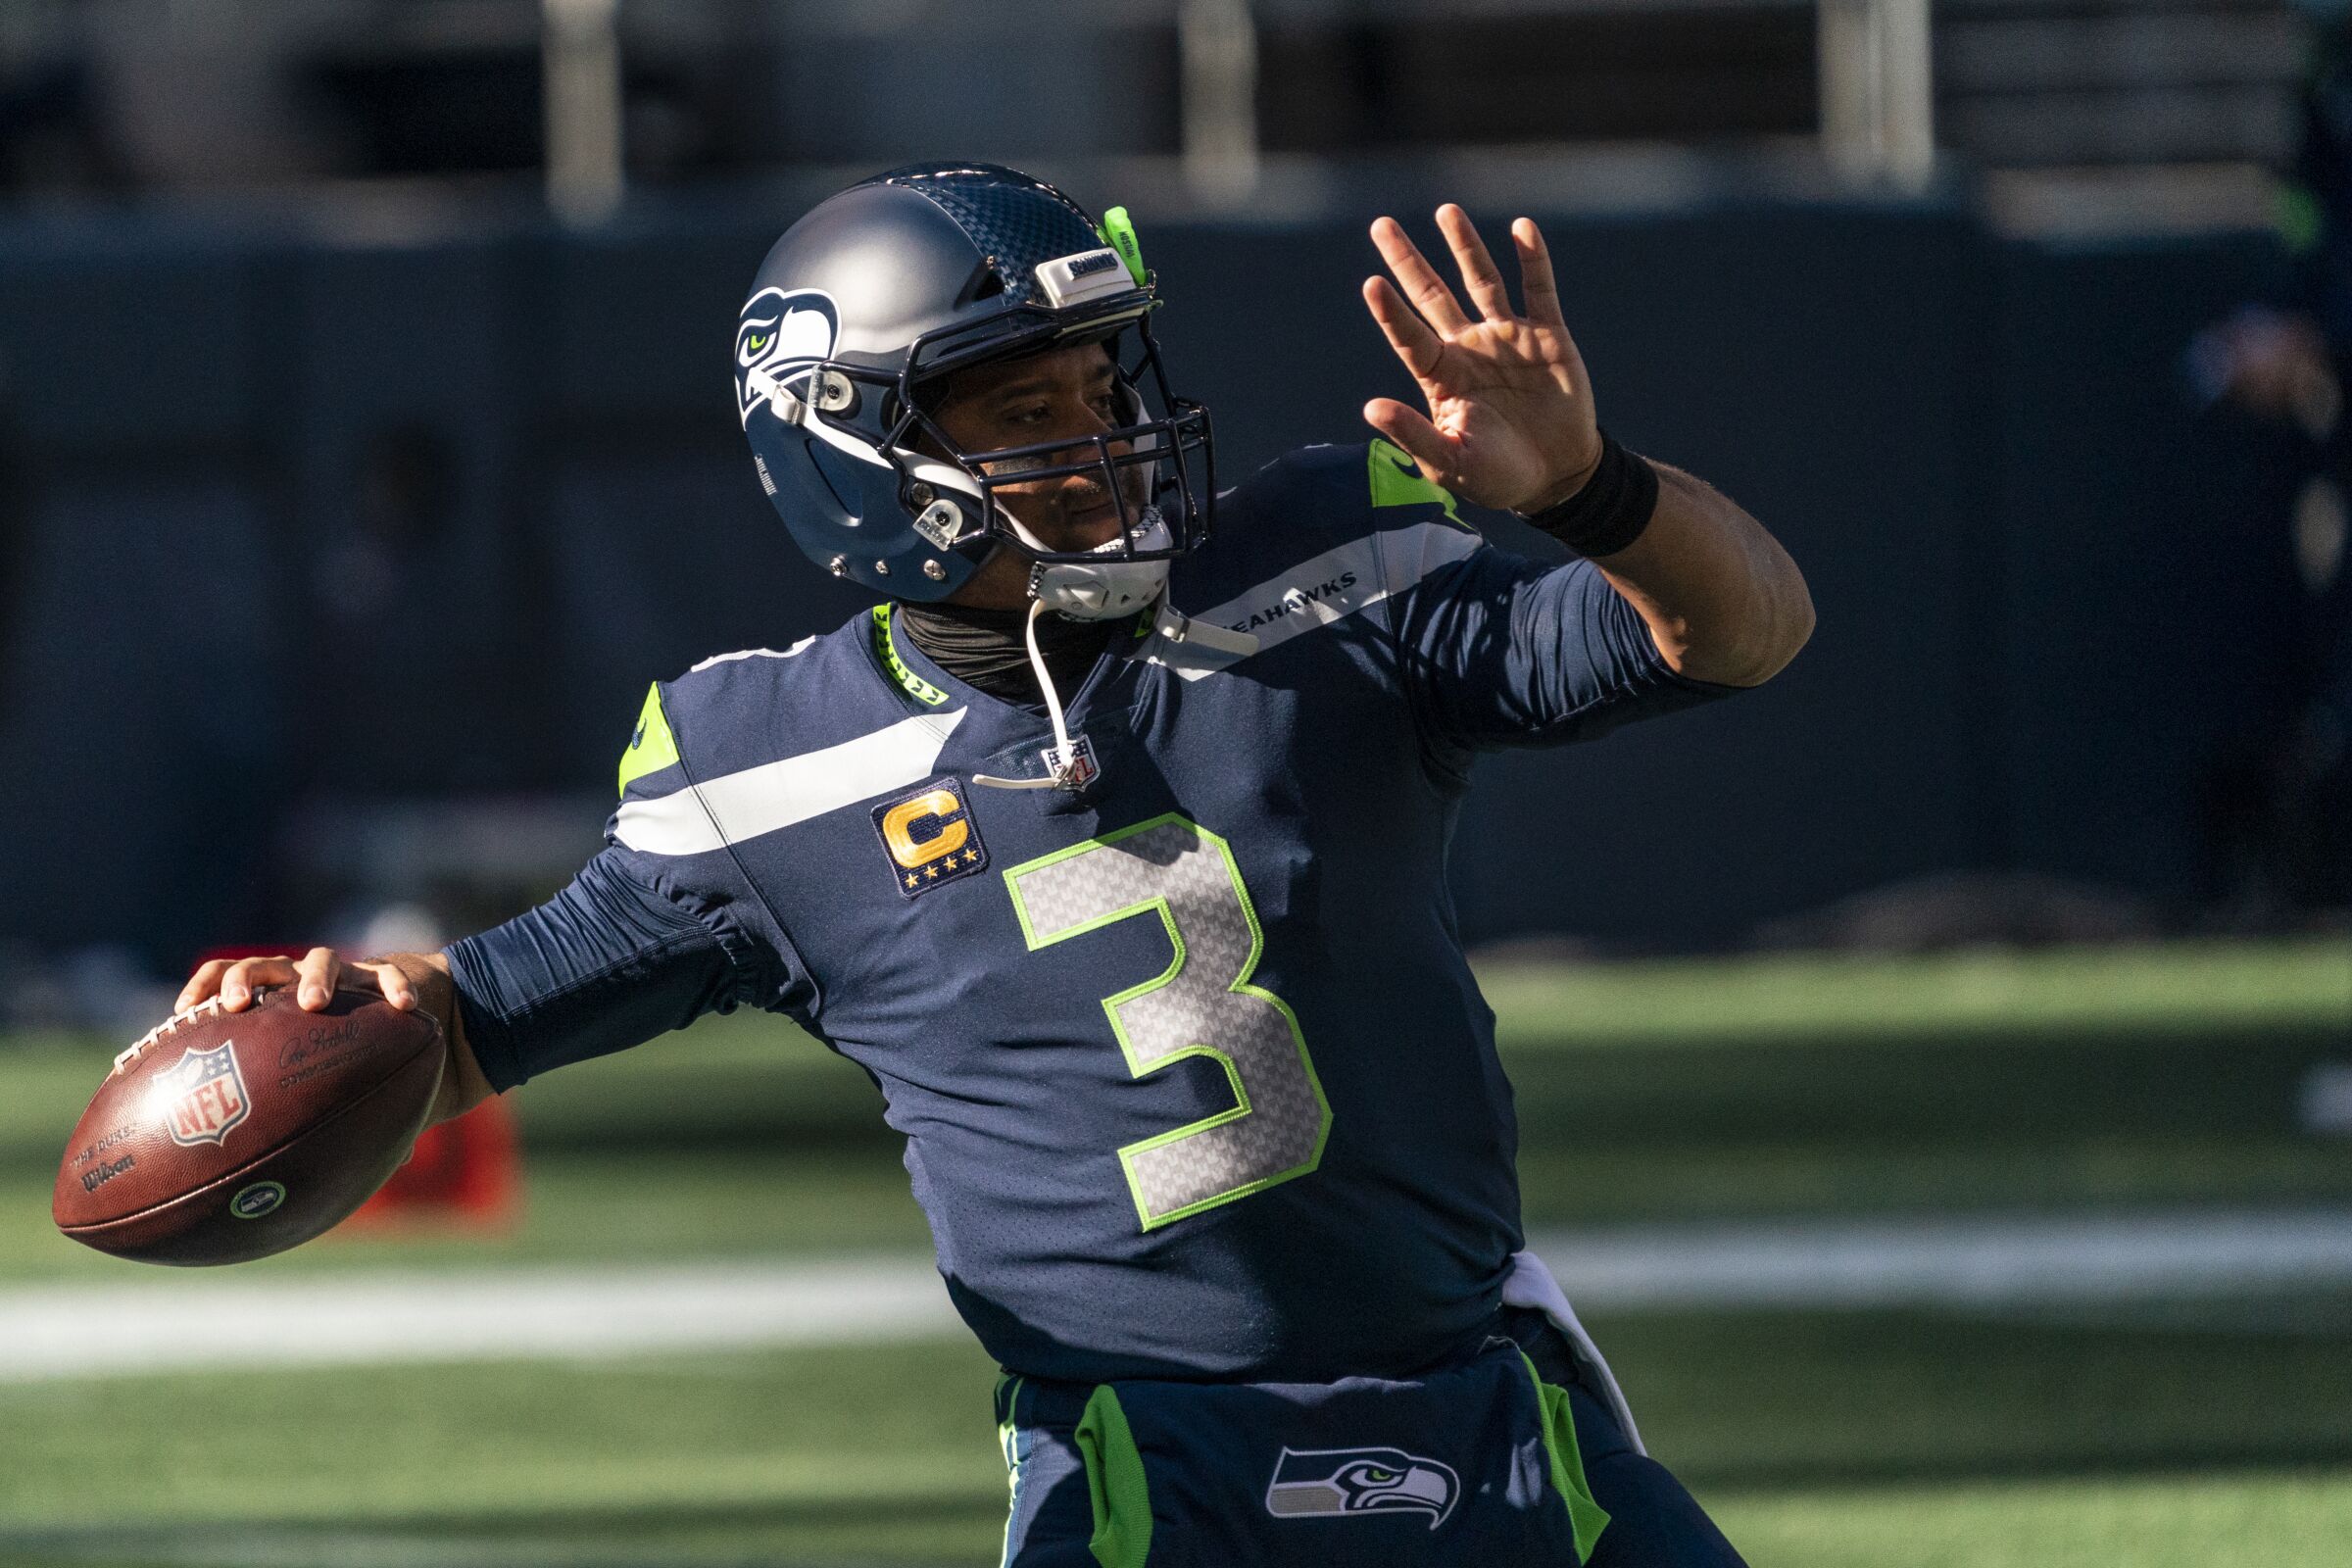 Seattle Seahawks quarterback Russell Wilson throws the ball during warmups.